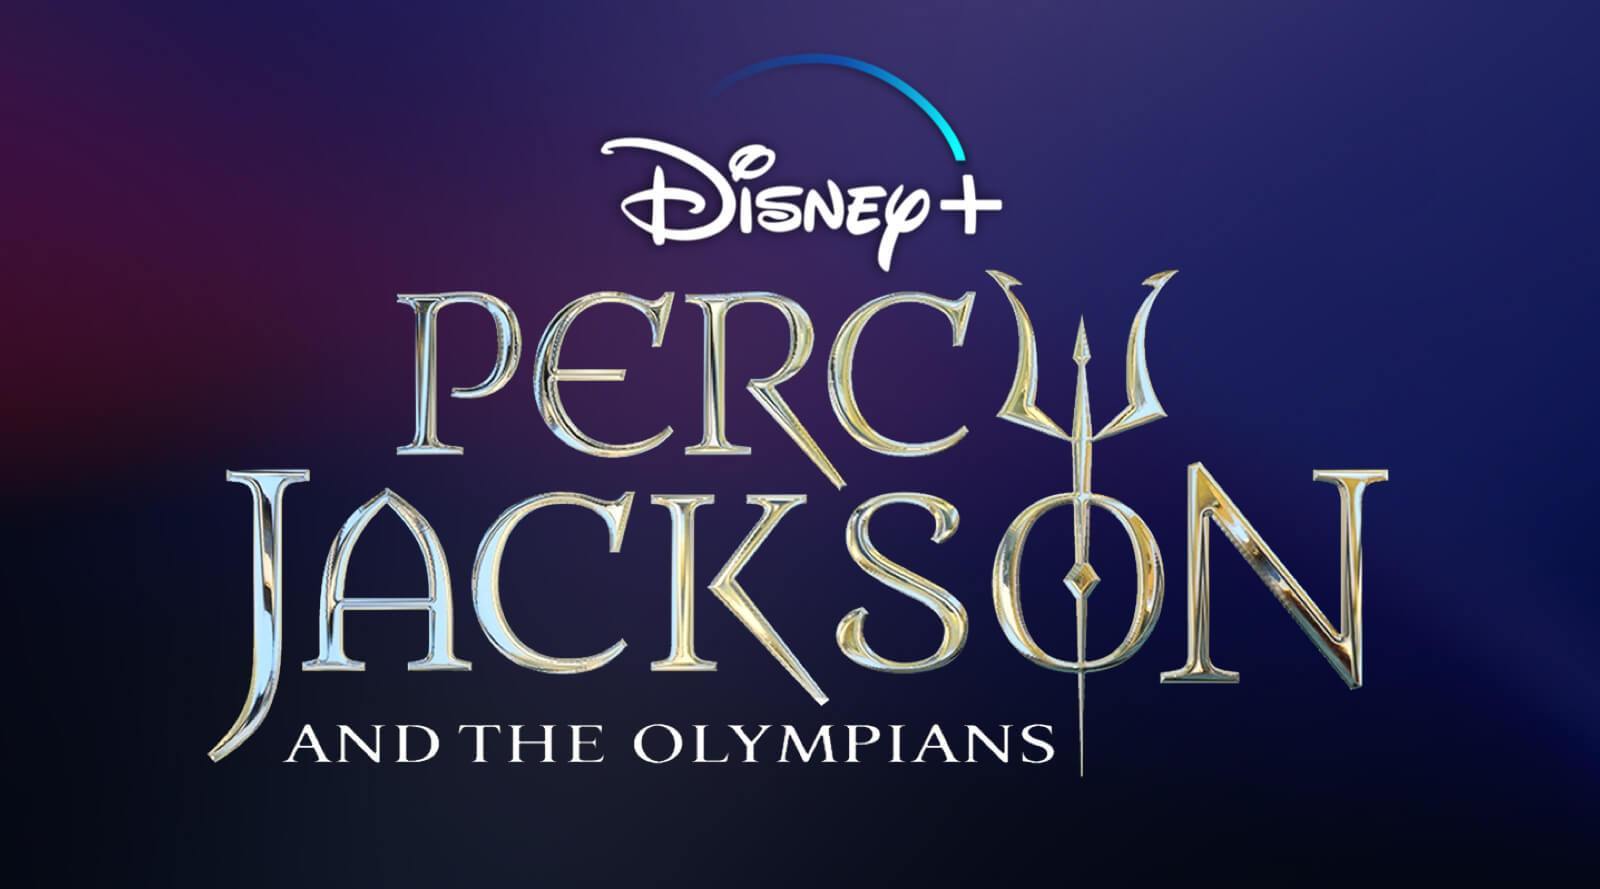 It’s Official PERCY JACKSON AND THE OLYMPIANS Coming To Disney+